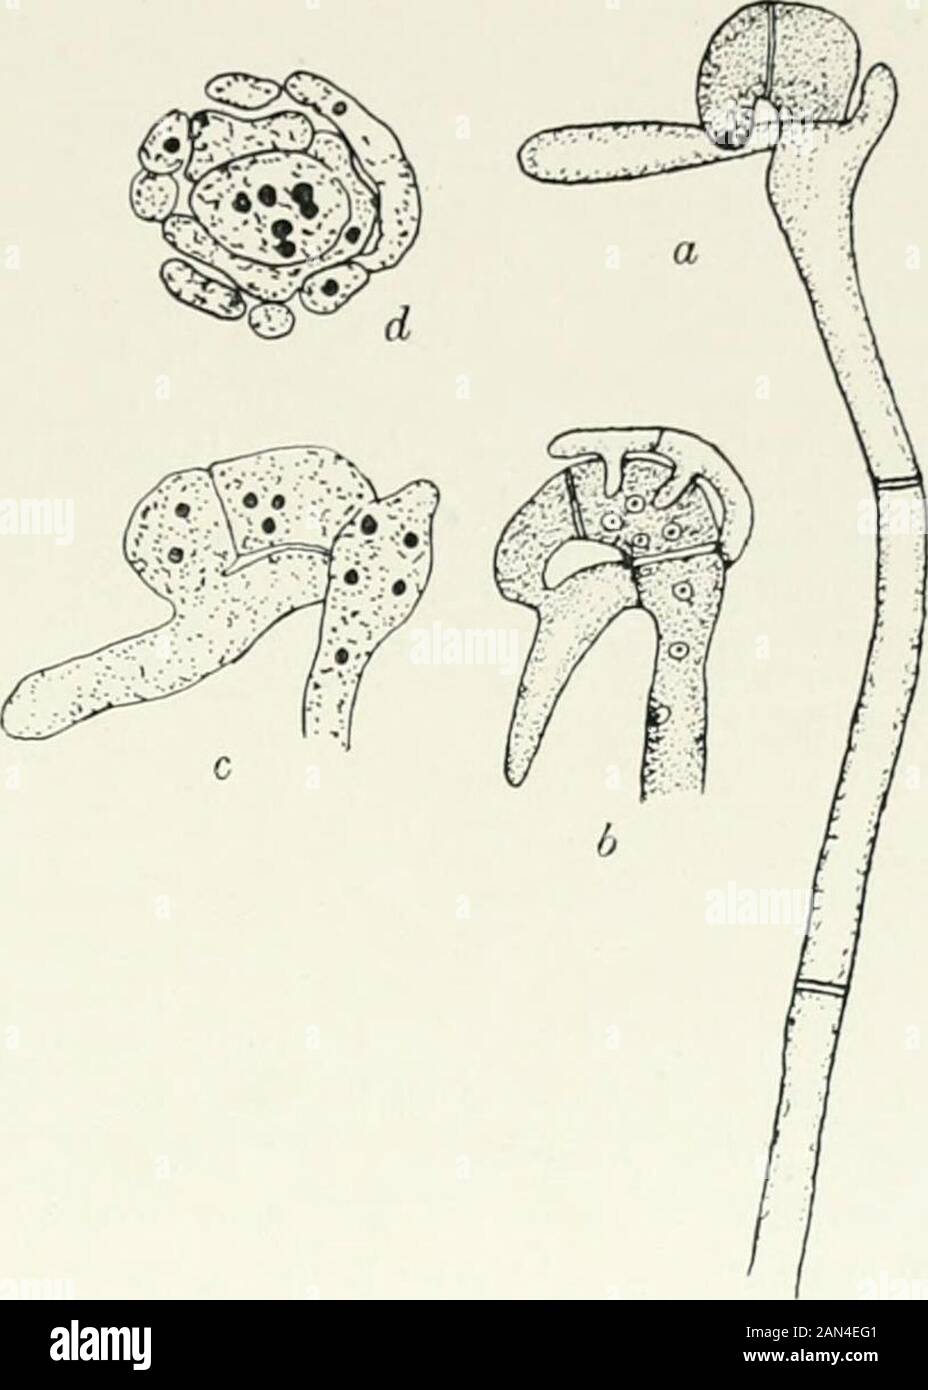 Fungi, Ascomycetes, Ustilaginales, Uredinales . s hyphaeramify. Erom the penultimatecells of the latter binucleateasci aredeveloped,and afterthenuclei have fused eight sporesare formed. The ascus wallbreaks down and the spores arefinally set free after the decayof the outer layer of the sheath. This sheath, with the en-closed mass of free ascospores,was long regarded as a singleorgan containing an indefinitenumber of spores; for thisreason the fungus was placedin the Hemiasci and given the Fi&lt;generic name of Monascus.The later stages of develop-ment are in fact difficult tofollow and have b Stock Photo